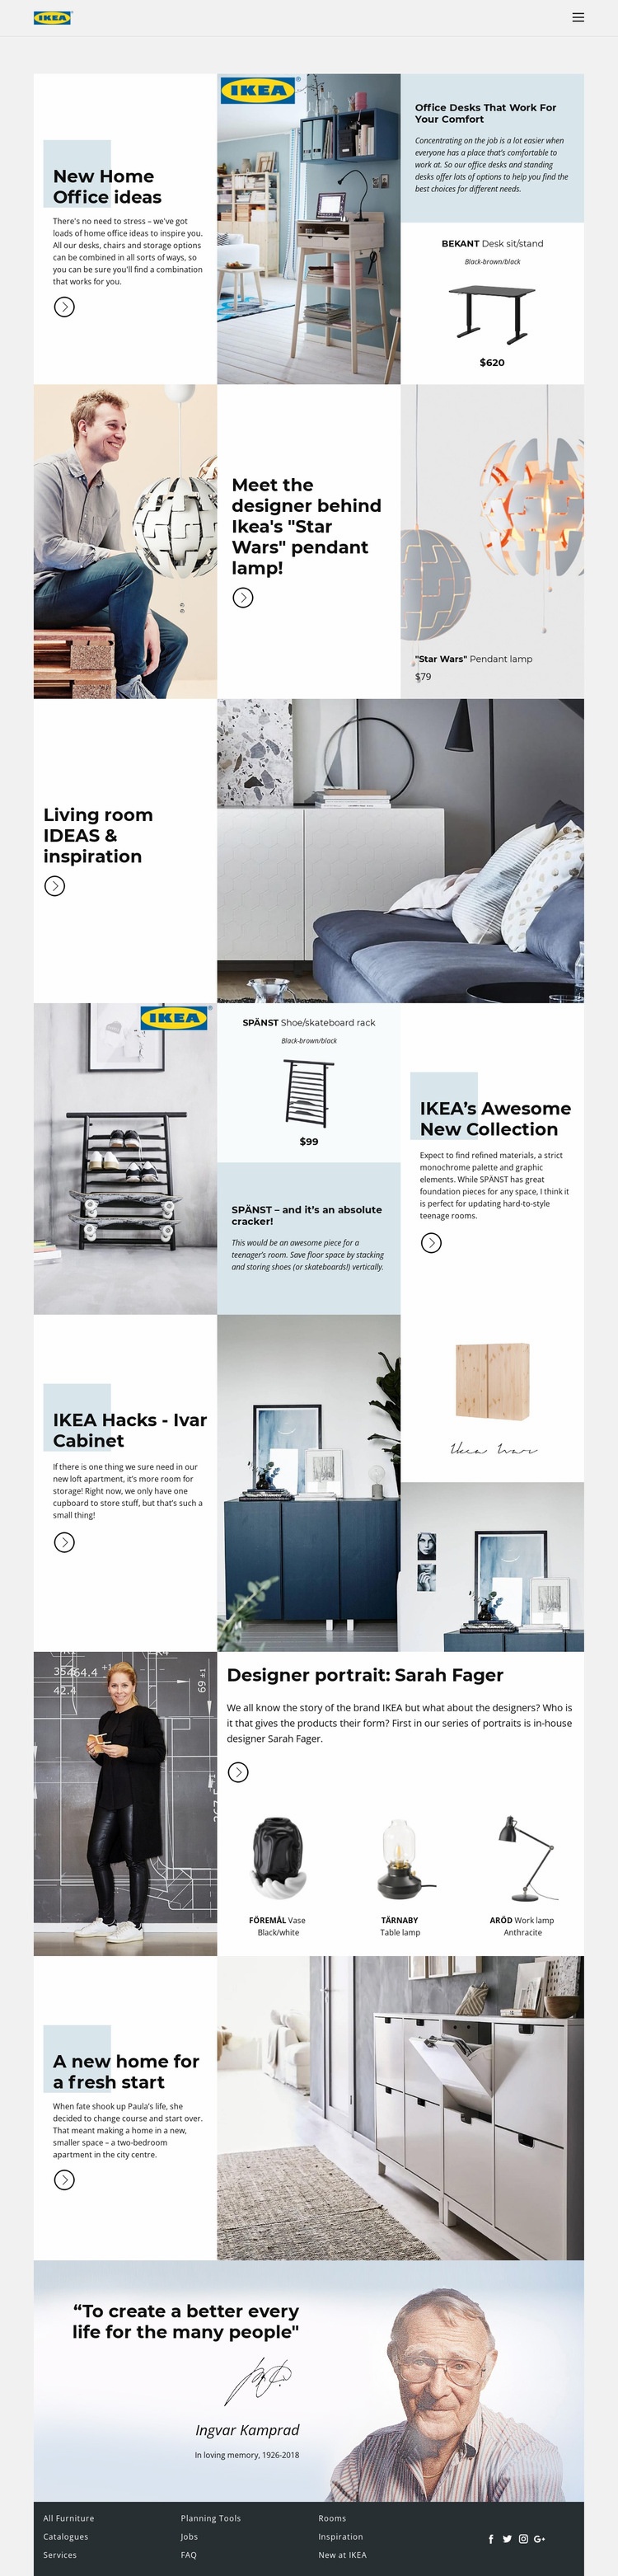 Inspiration from IKEA Html Code Example